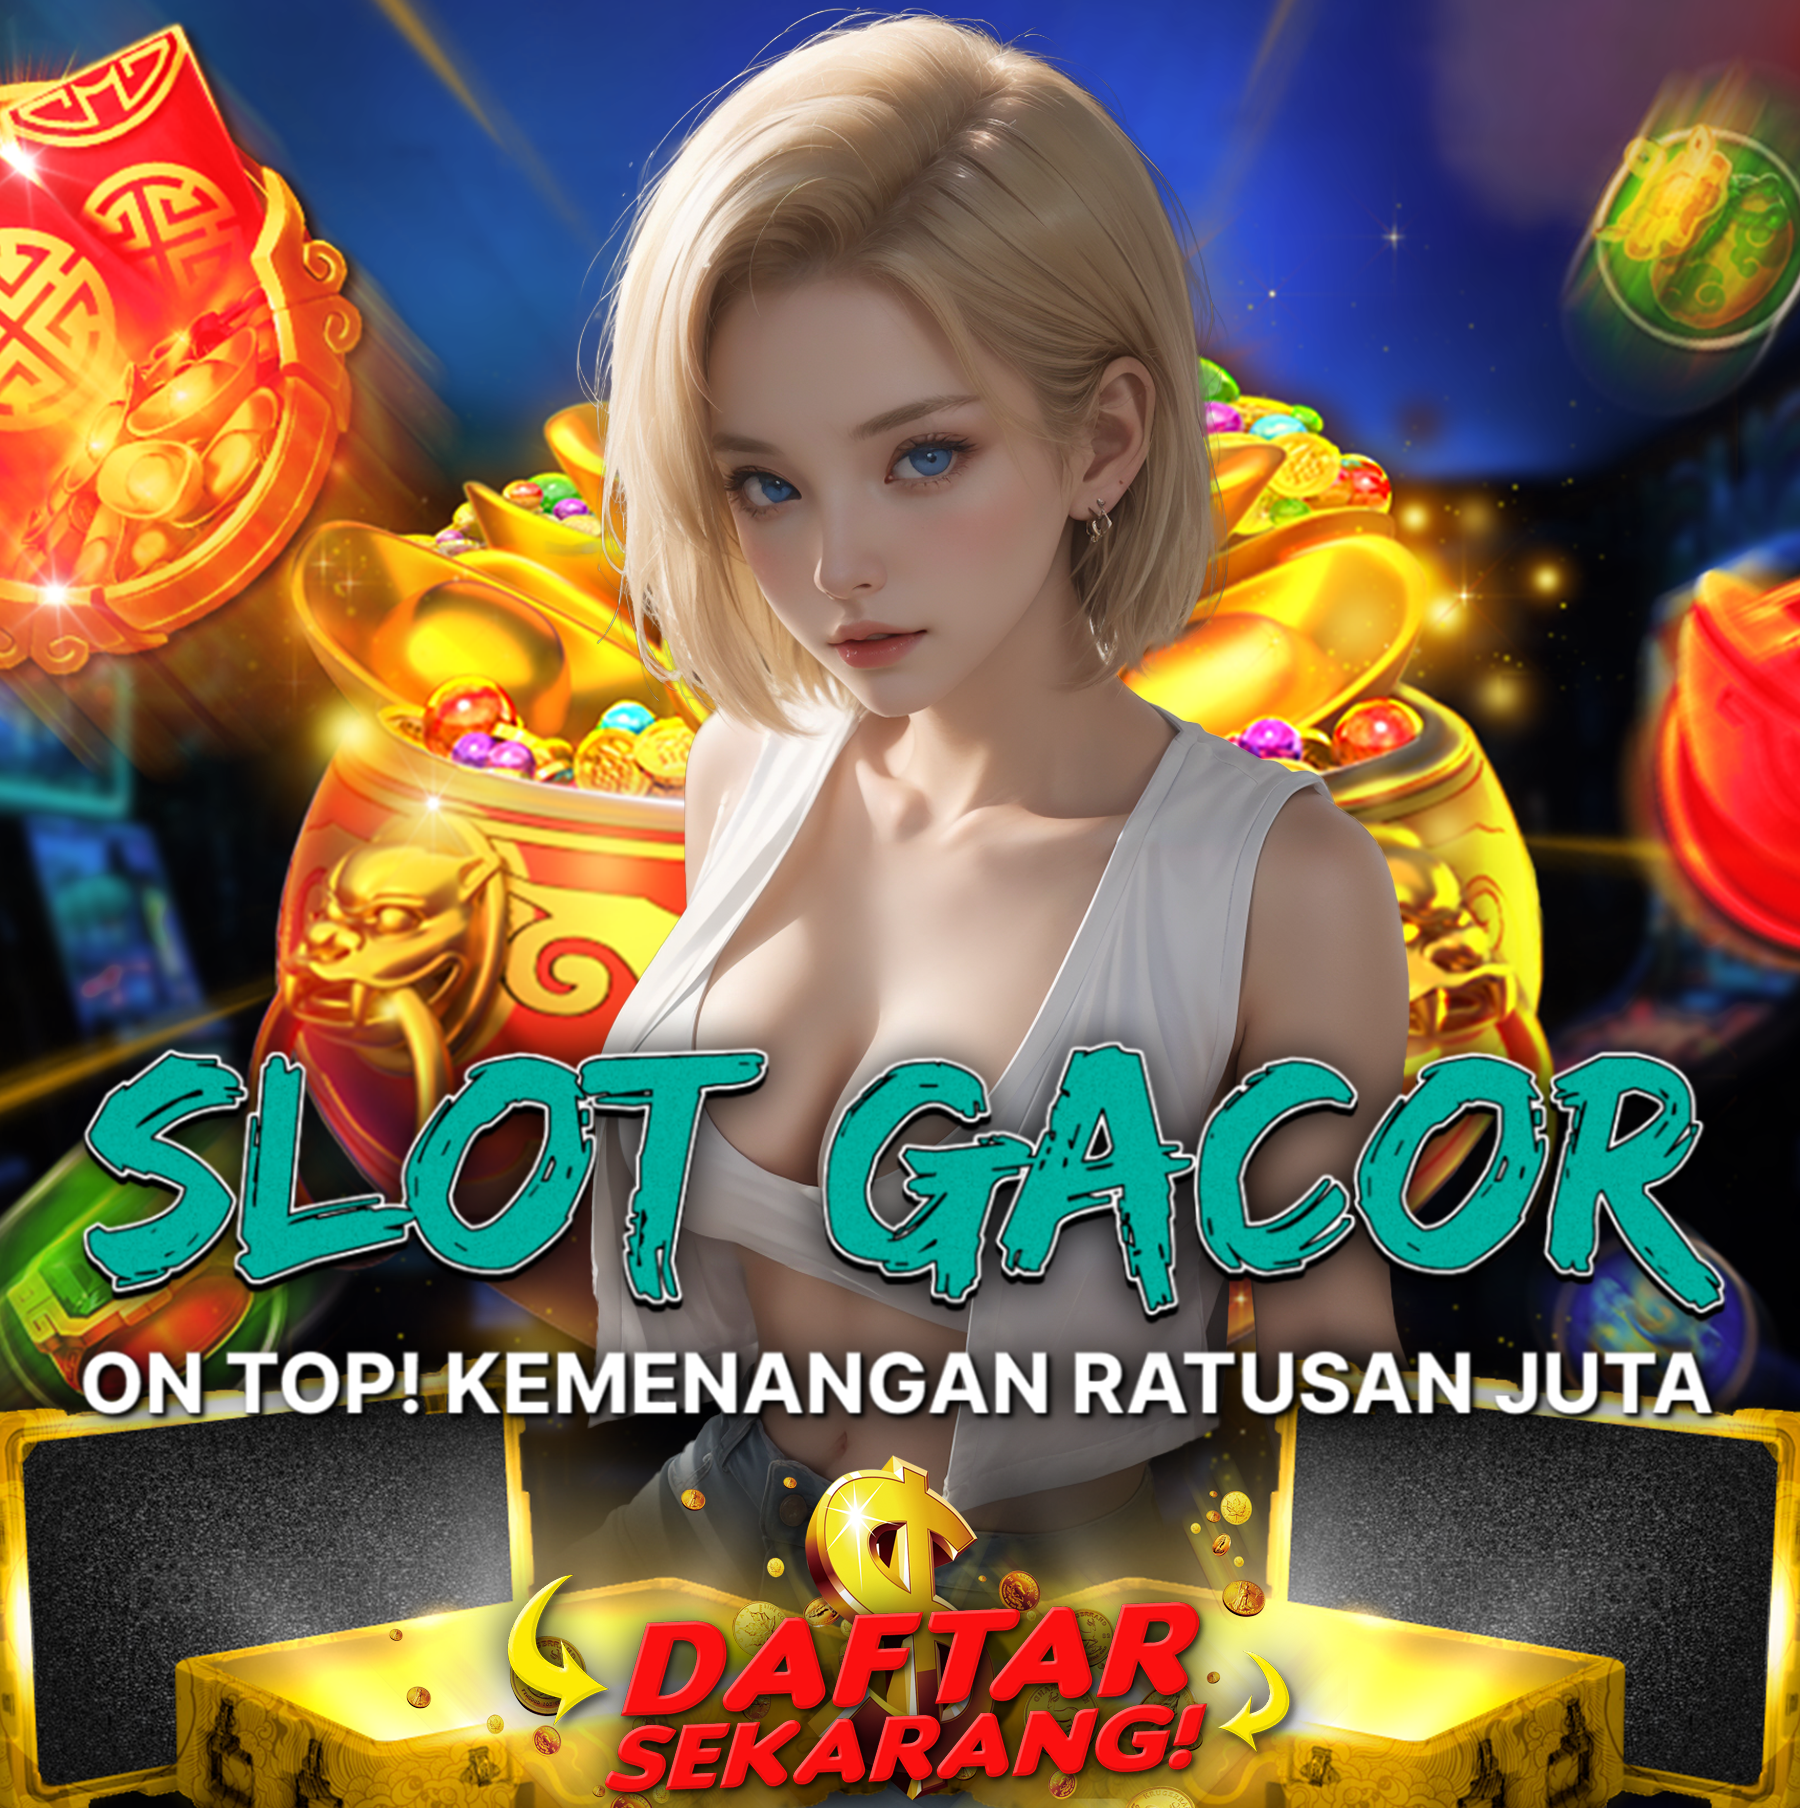 You are currently viewing Situs Agen Togel Toto Terpercaya Online Tergacor DiIndonesia